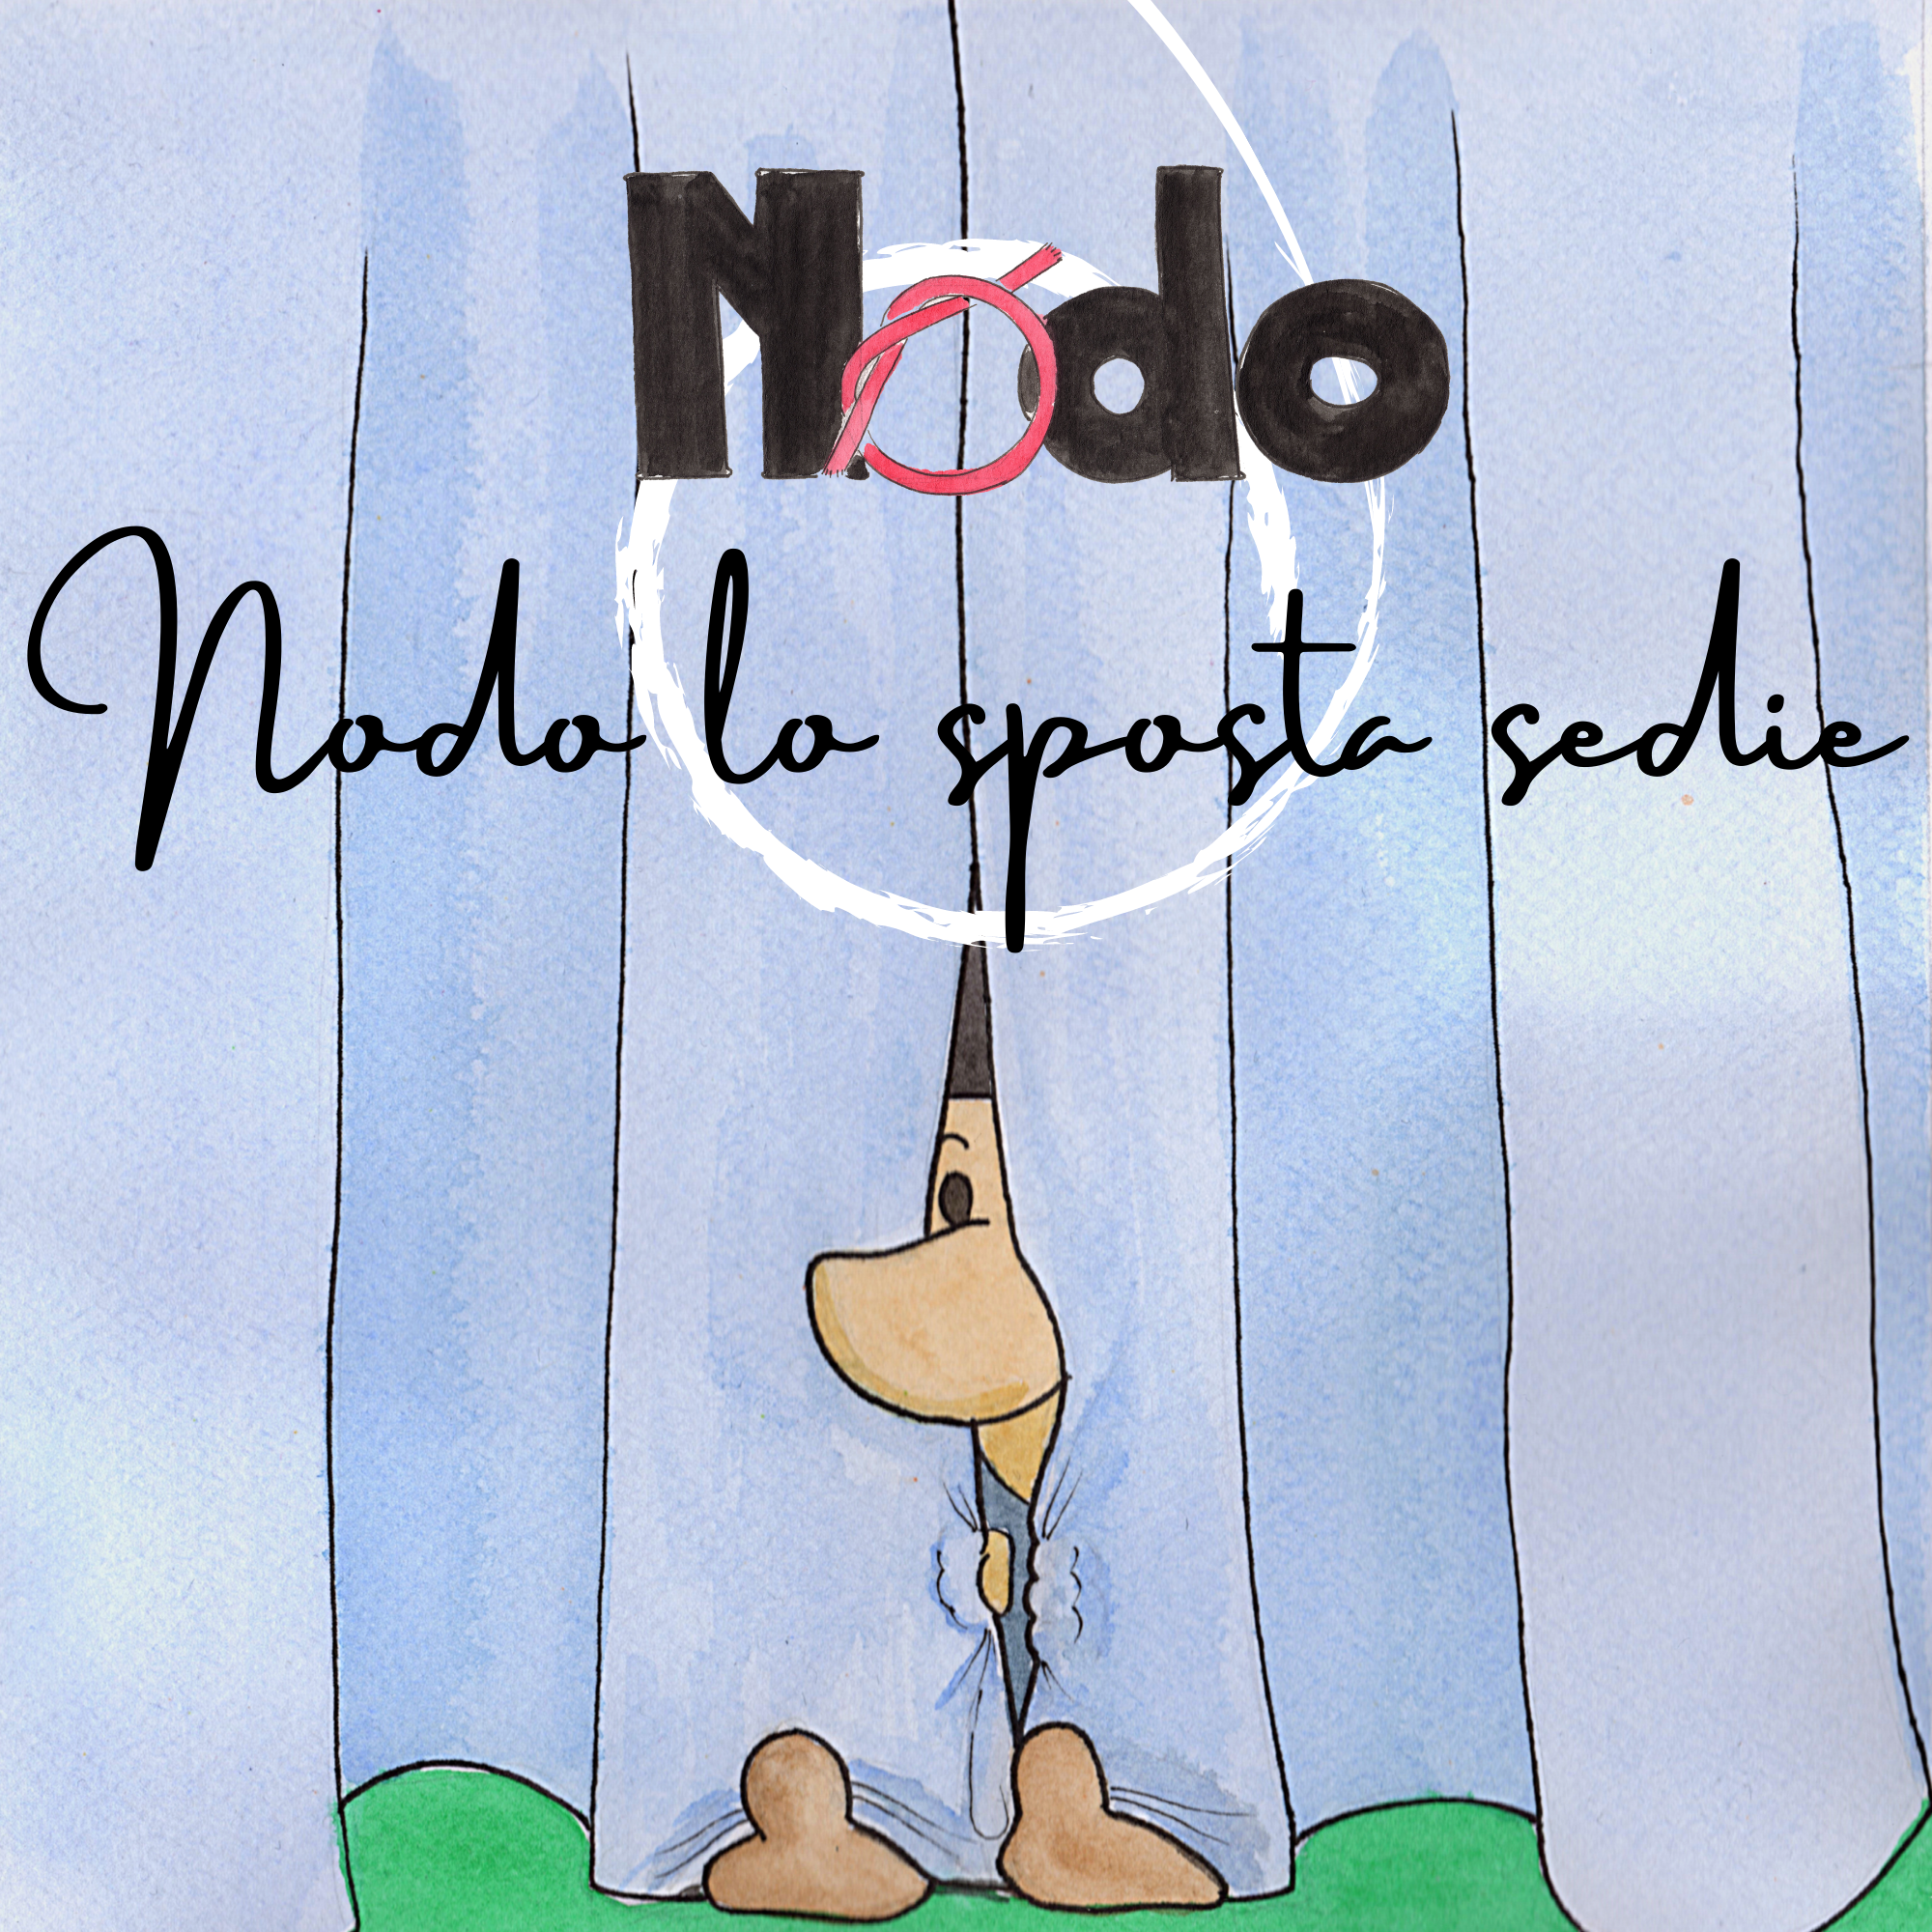 Nodo, the chairs' mover. A children's book written by Daniele Frau and illustrated by Gabriele Manca.